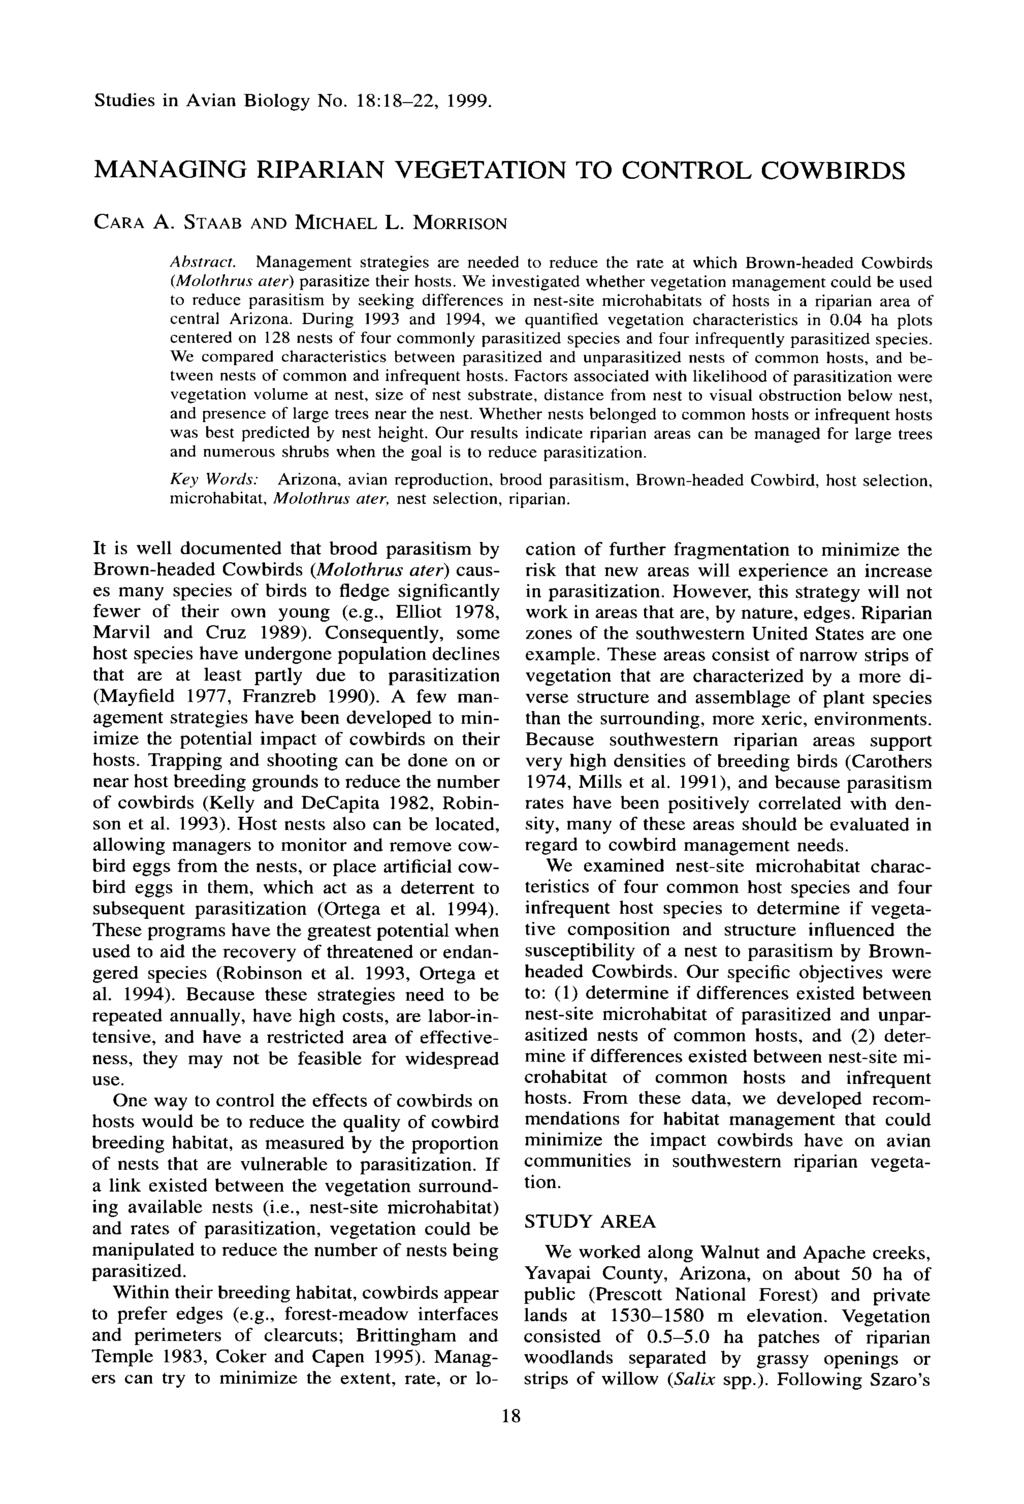 Studies in Avian Biology No. 18:18-22, 1999. MANAGING RIPARIAN VEGETATION TO CONTROL COWBIRDS CARA A. STAAB AND MICHAEL L.MORRISON Abstract.